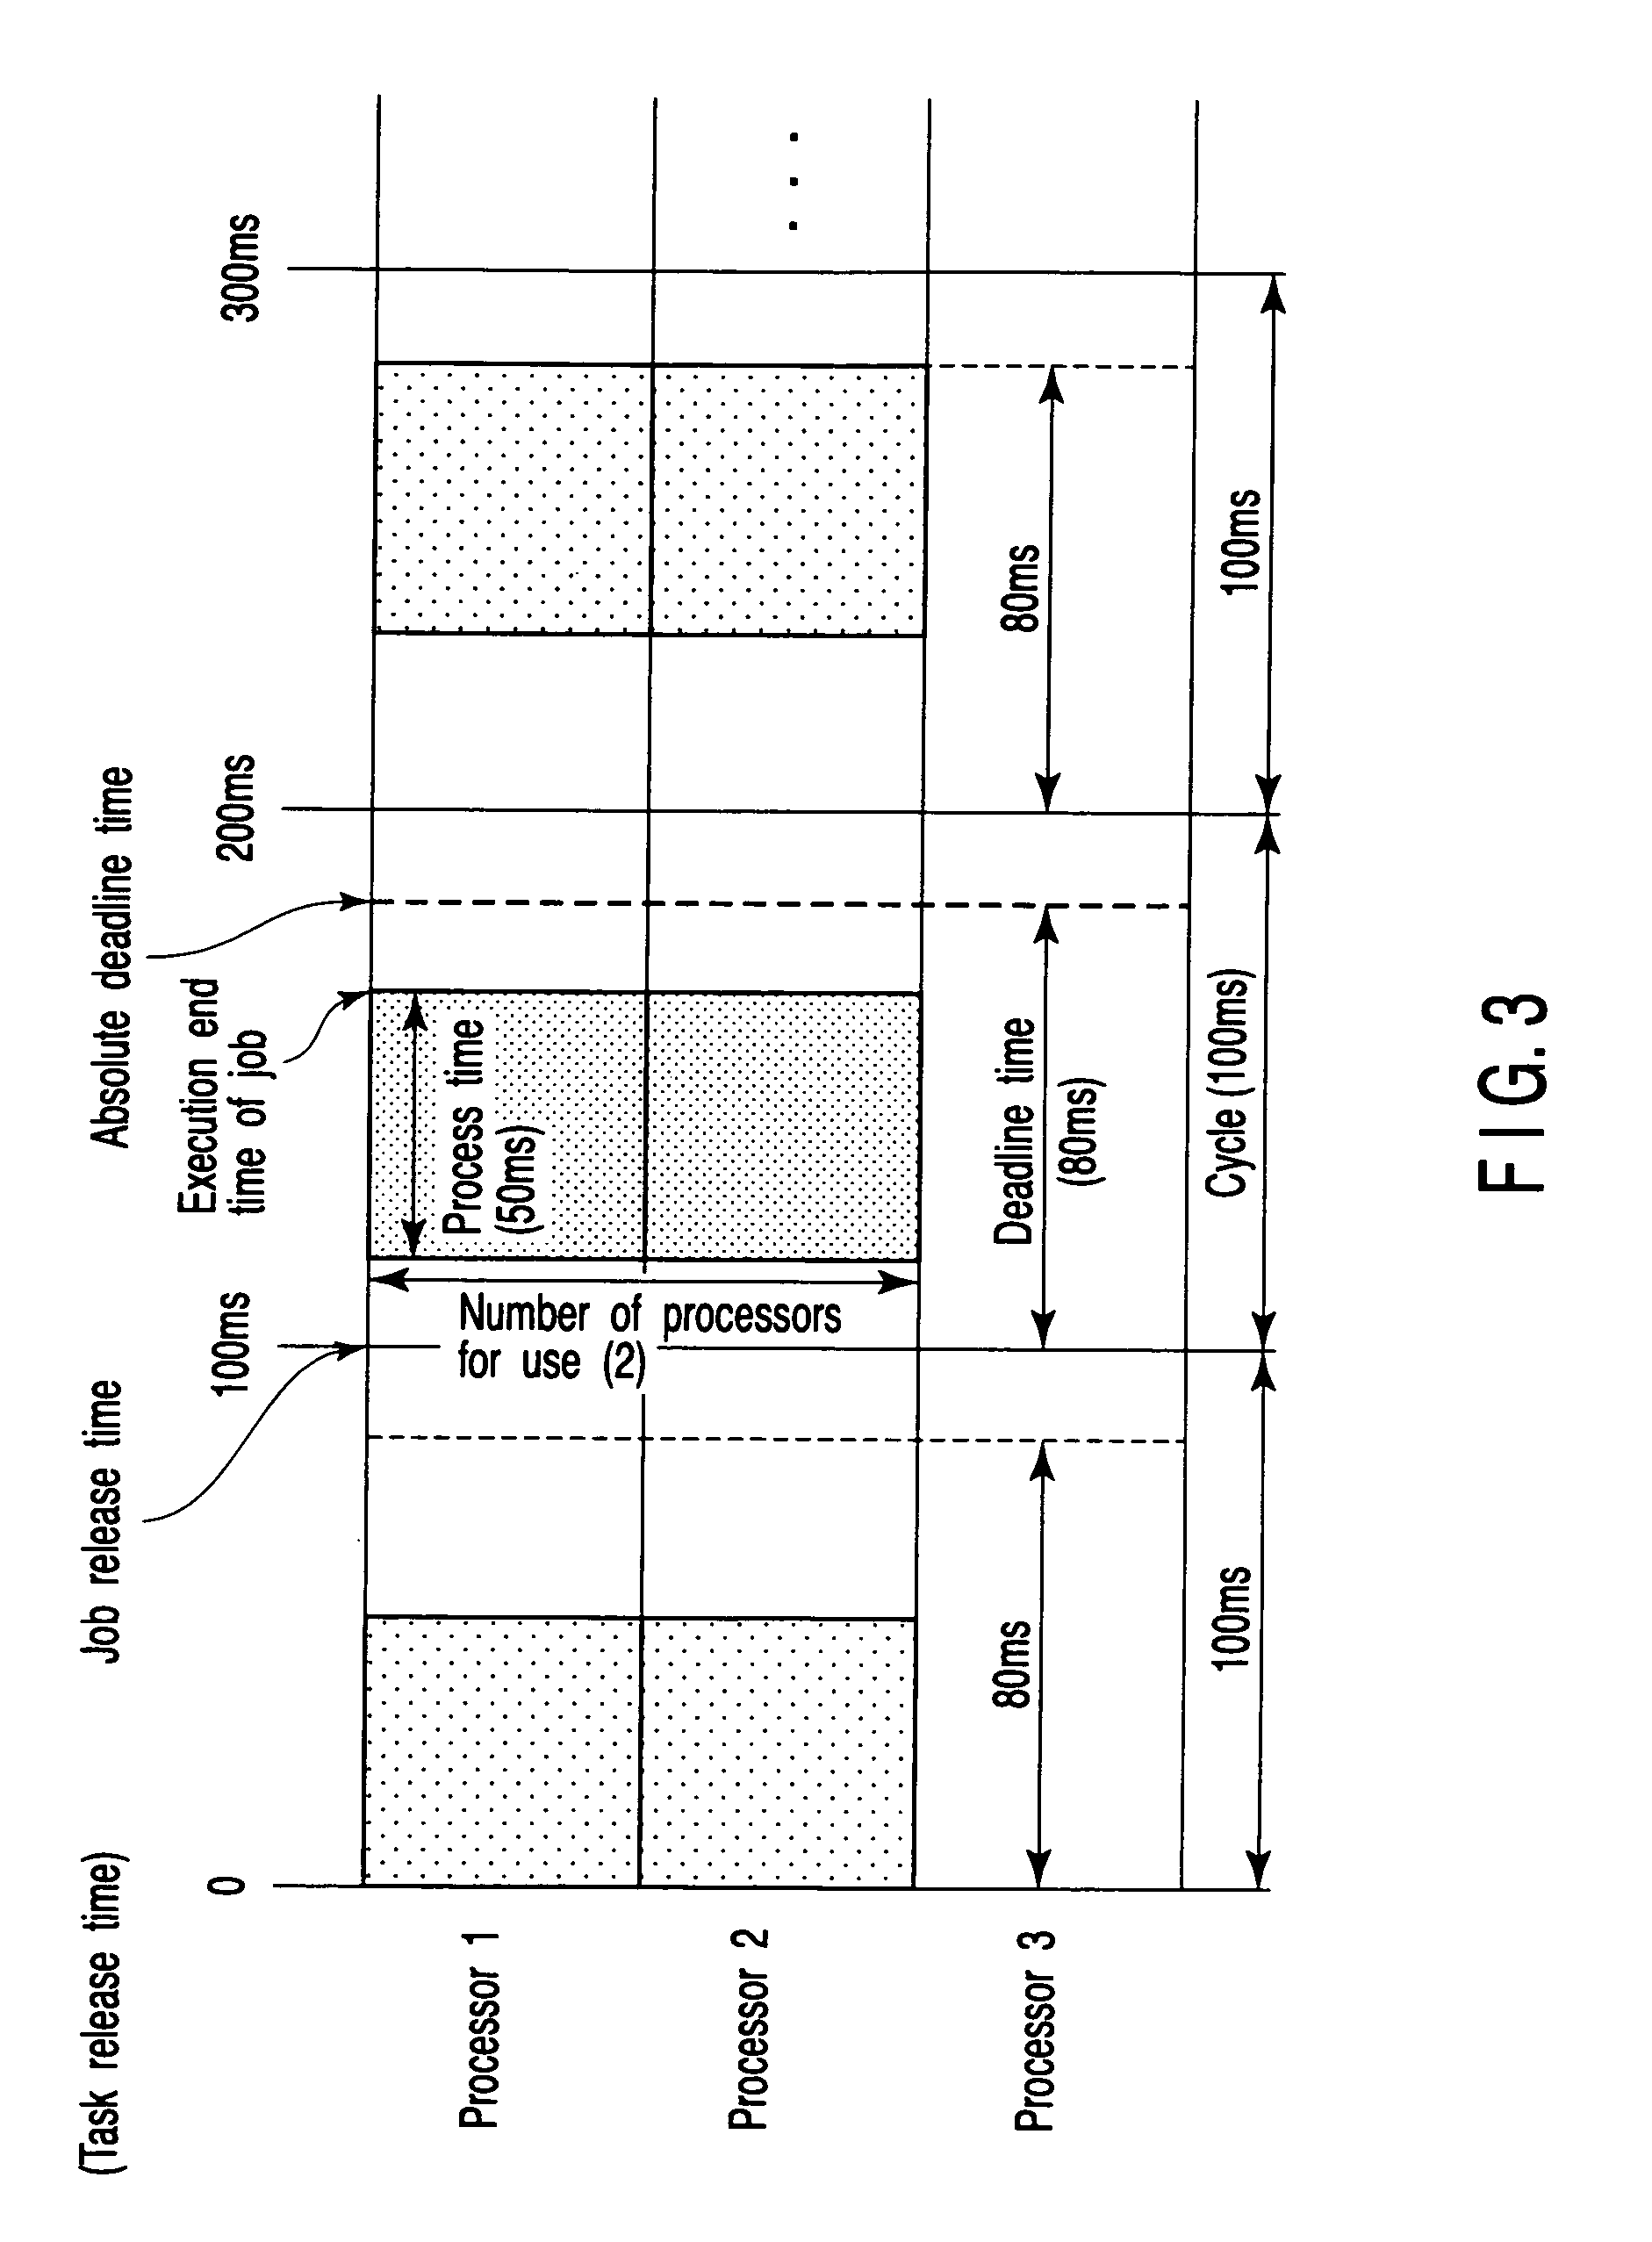 Schedulability determination method and real-time system